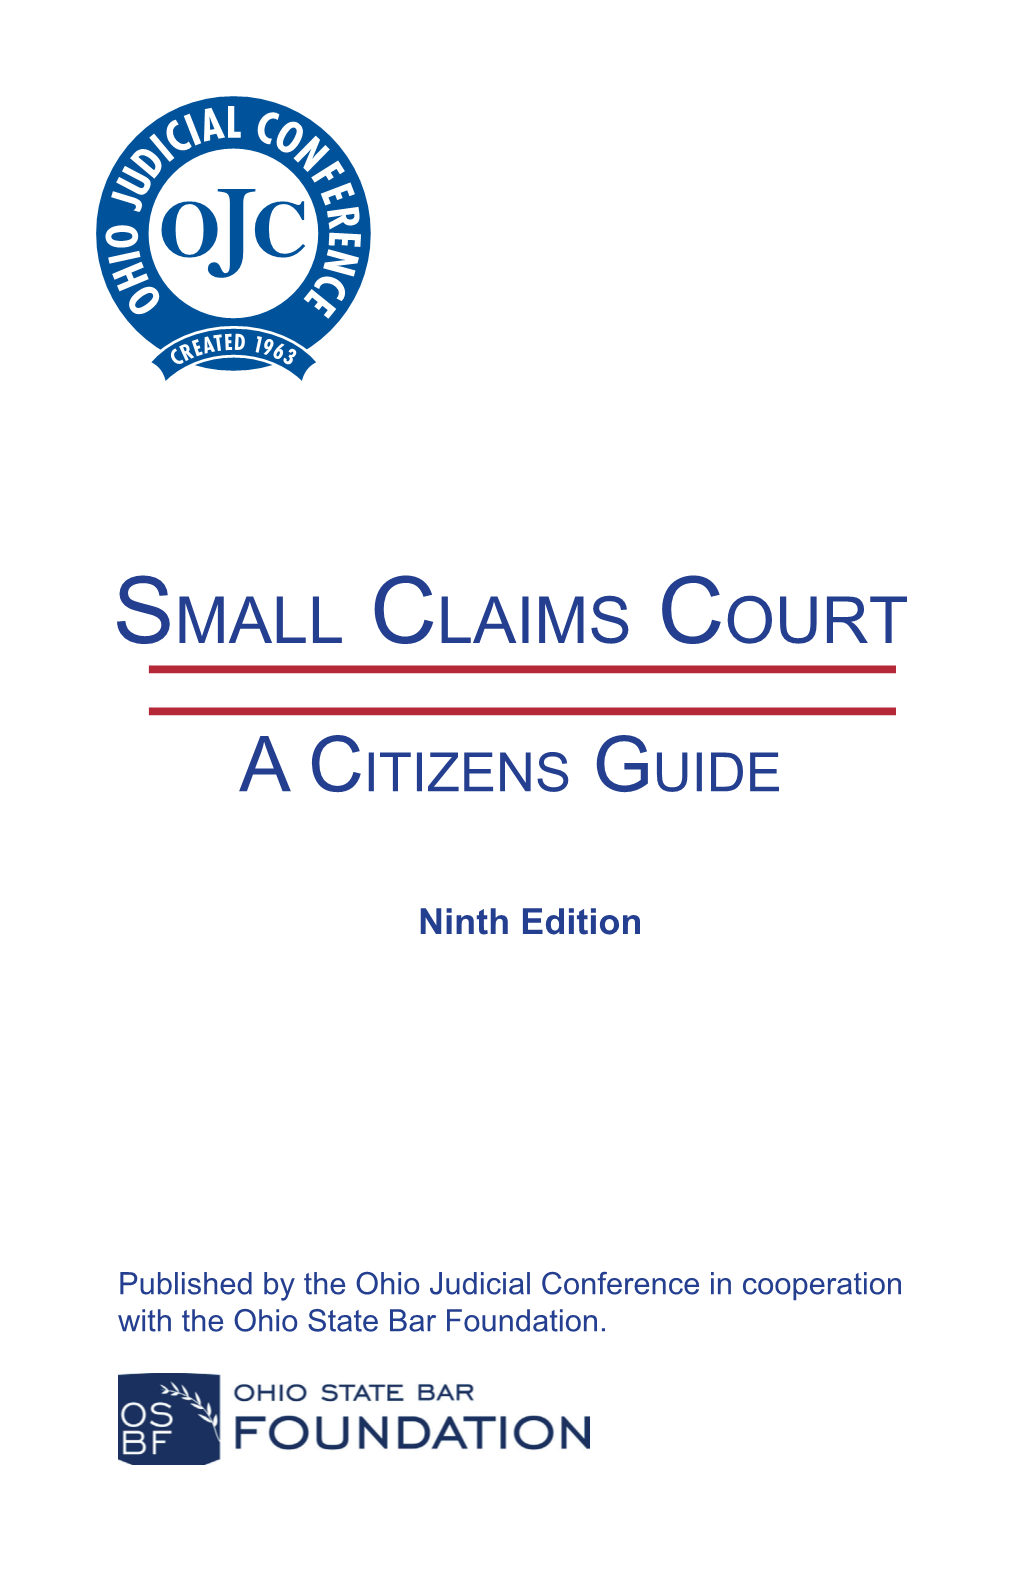 Small Claims Court Vary from Court to Court, and Laws and Rules Change Over Time